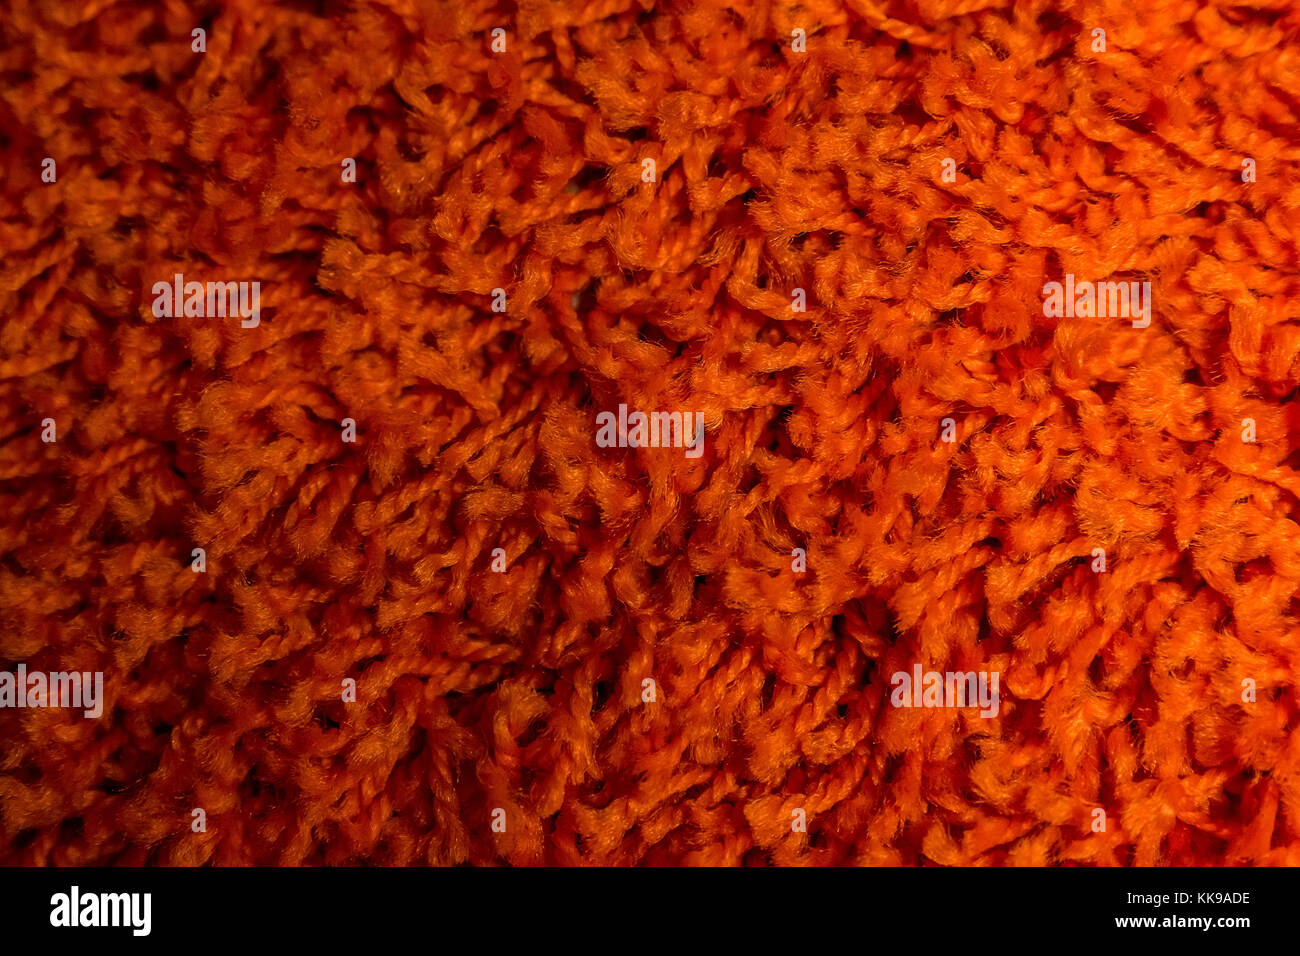 Close up of bright red domestic woolen carpet texture Stock Photo